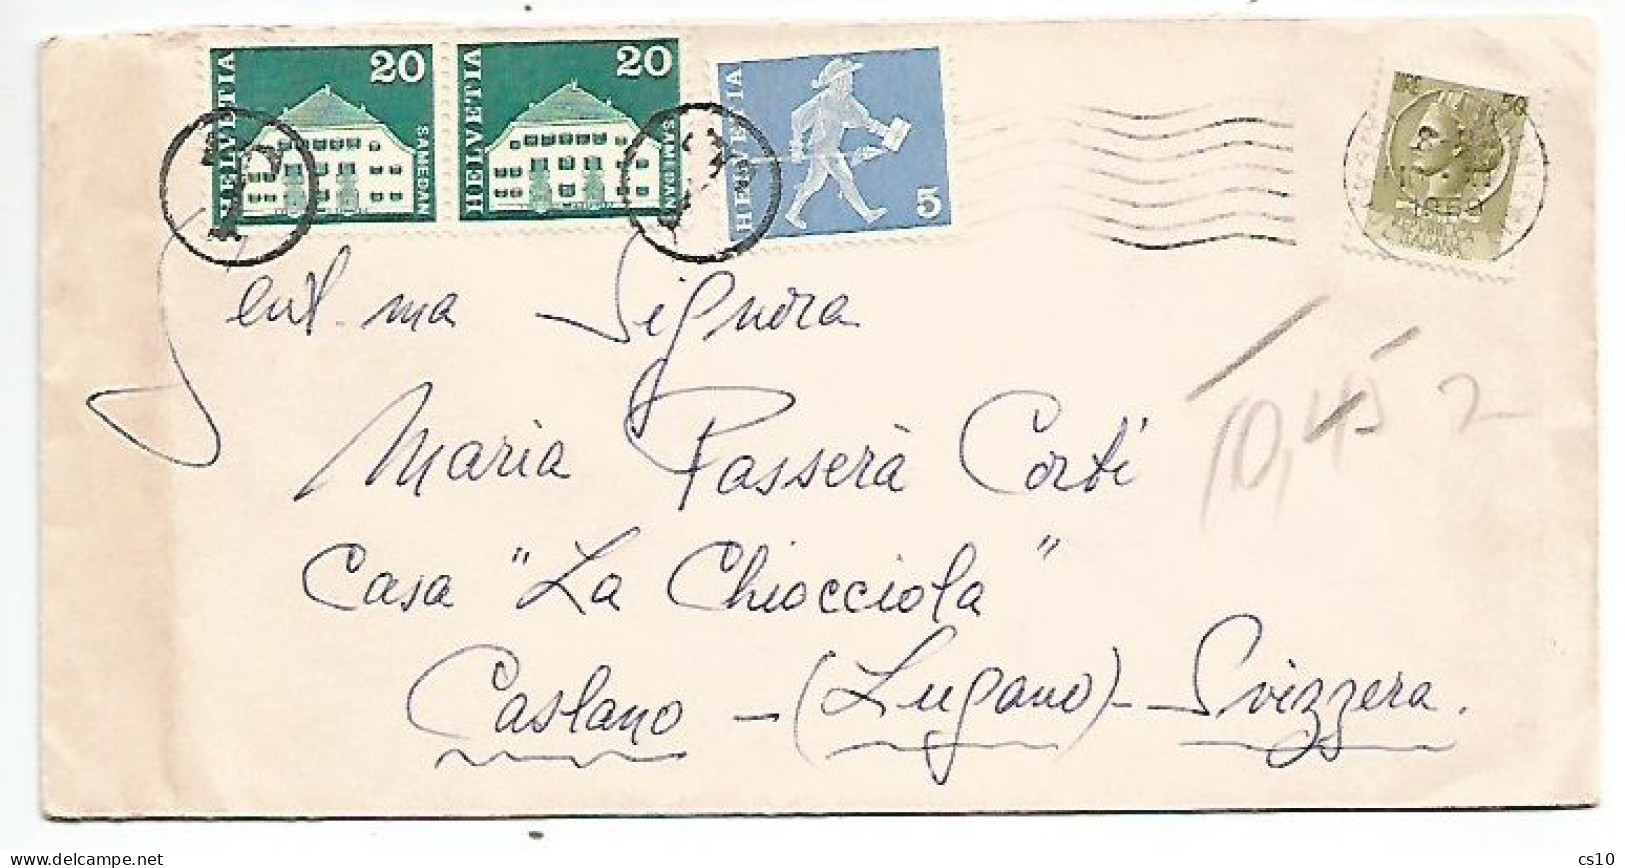 Suisse 3v Regular Issues C.20 Pair + Postman C.5 Used As Postage Due Tax CV Italy 10nov1969 - Postmark Collection